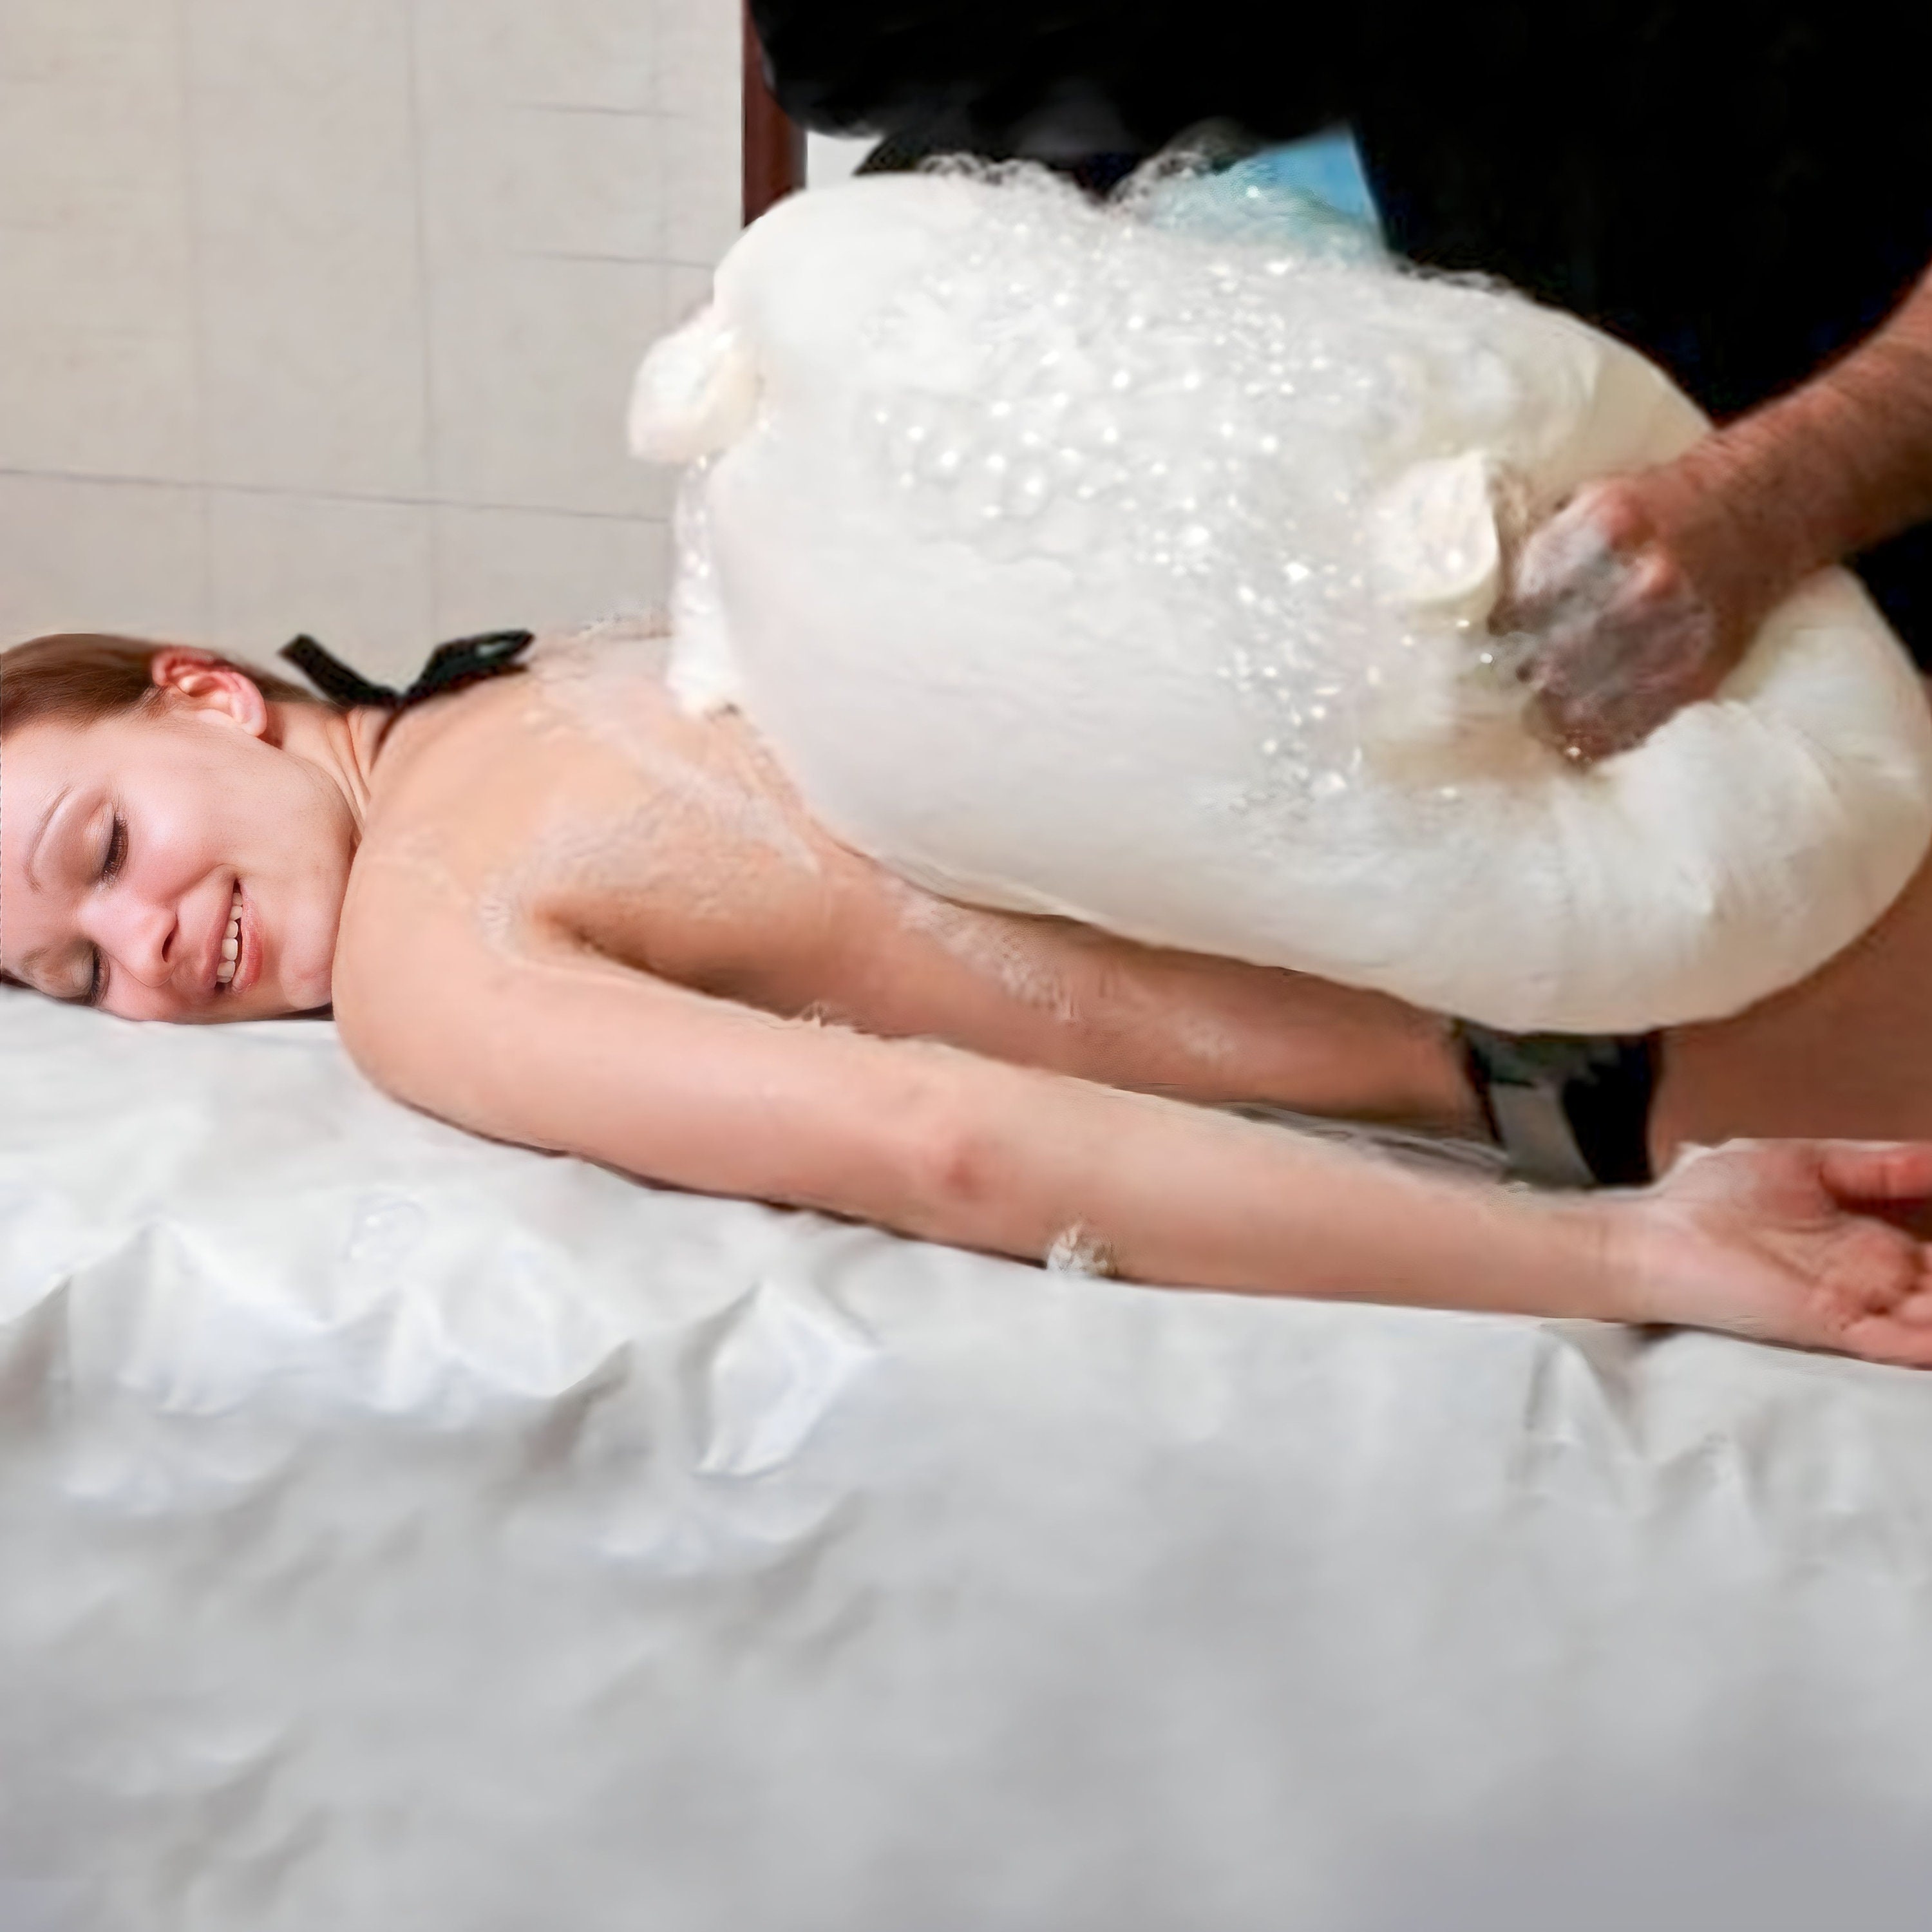 Turkish Bath Foam Bag Personal Care Relaxation pic